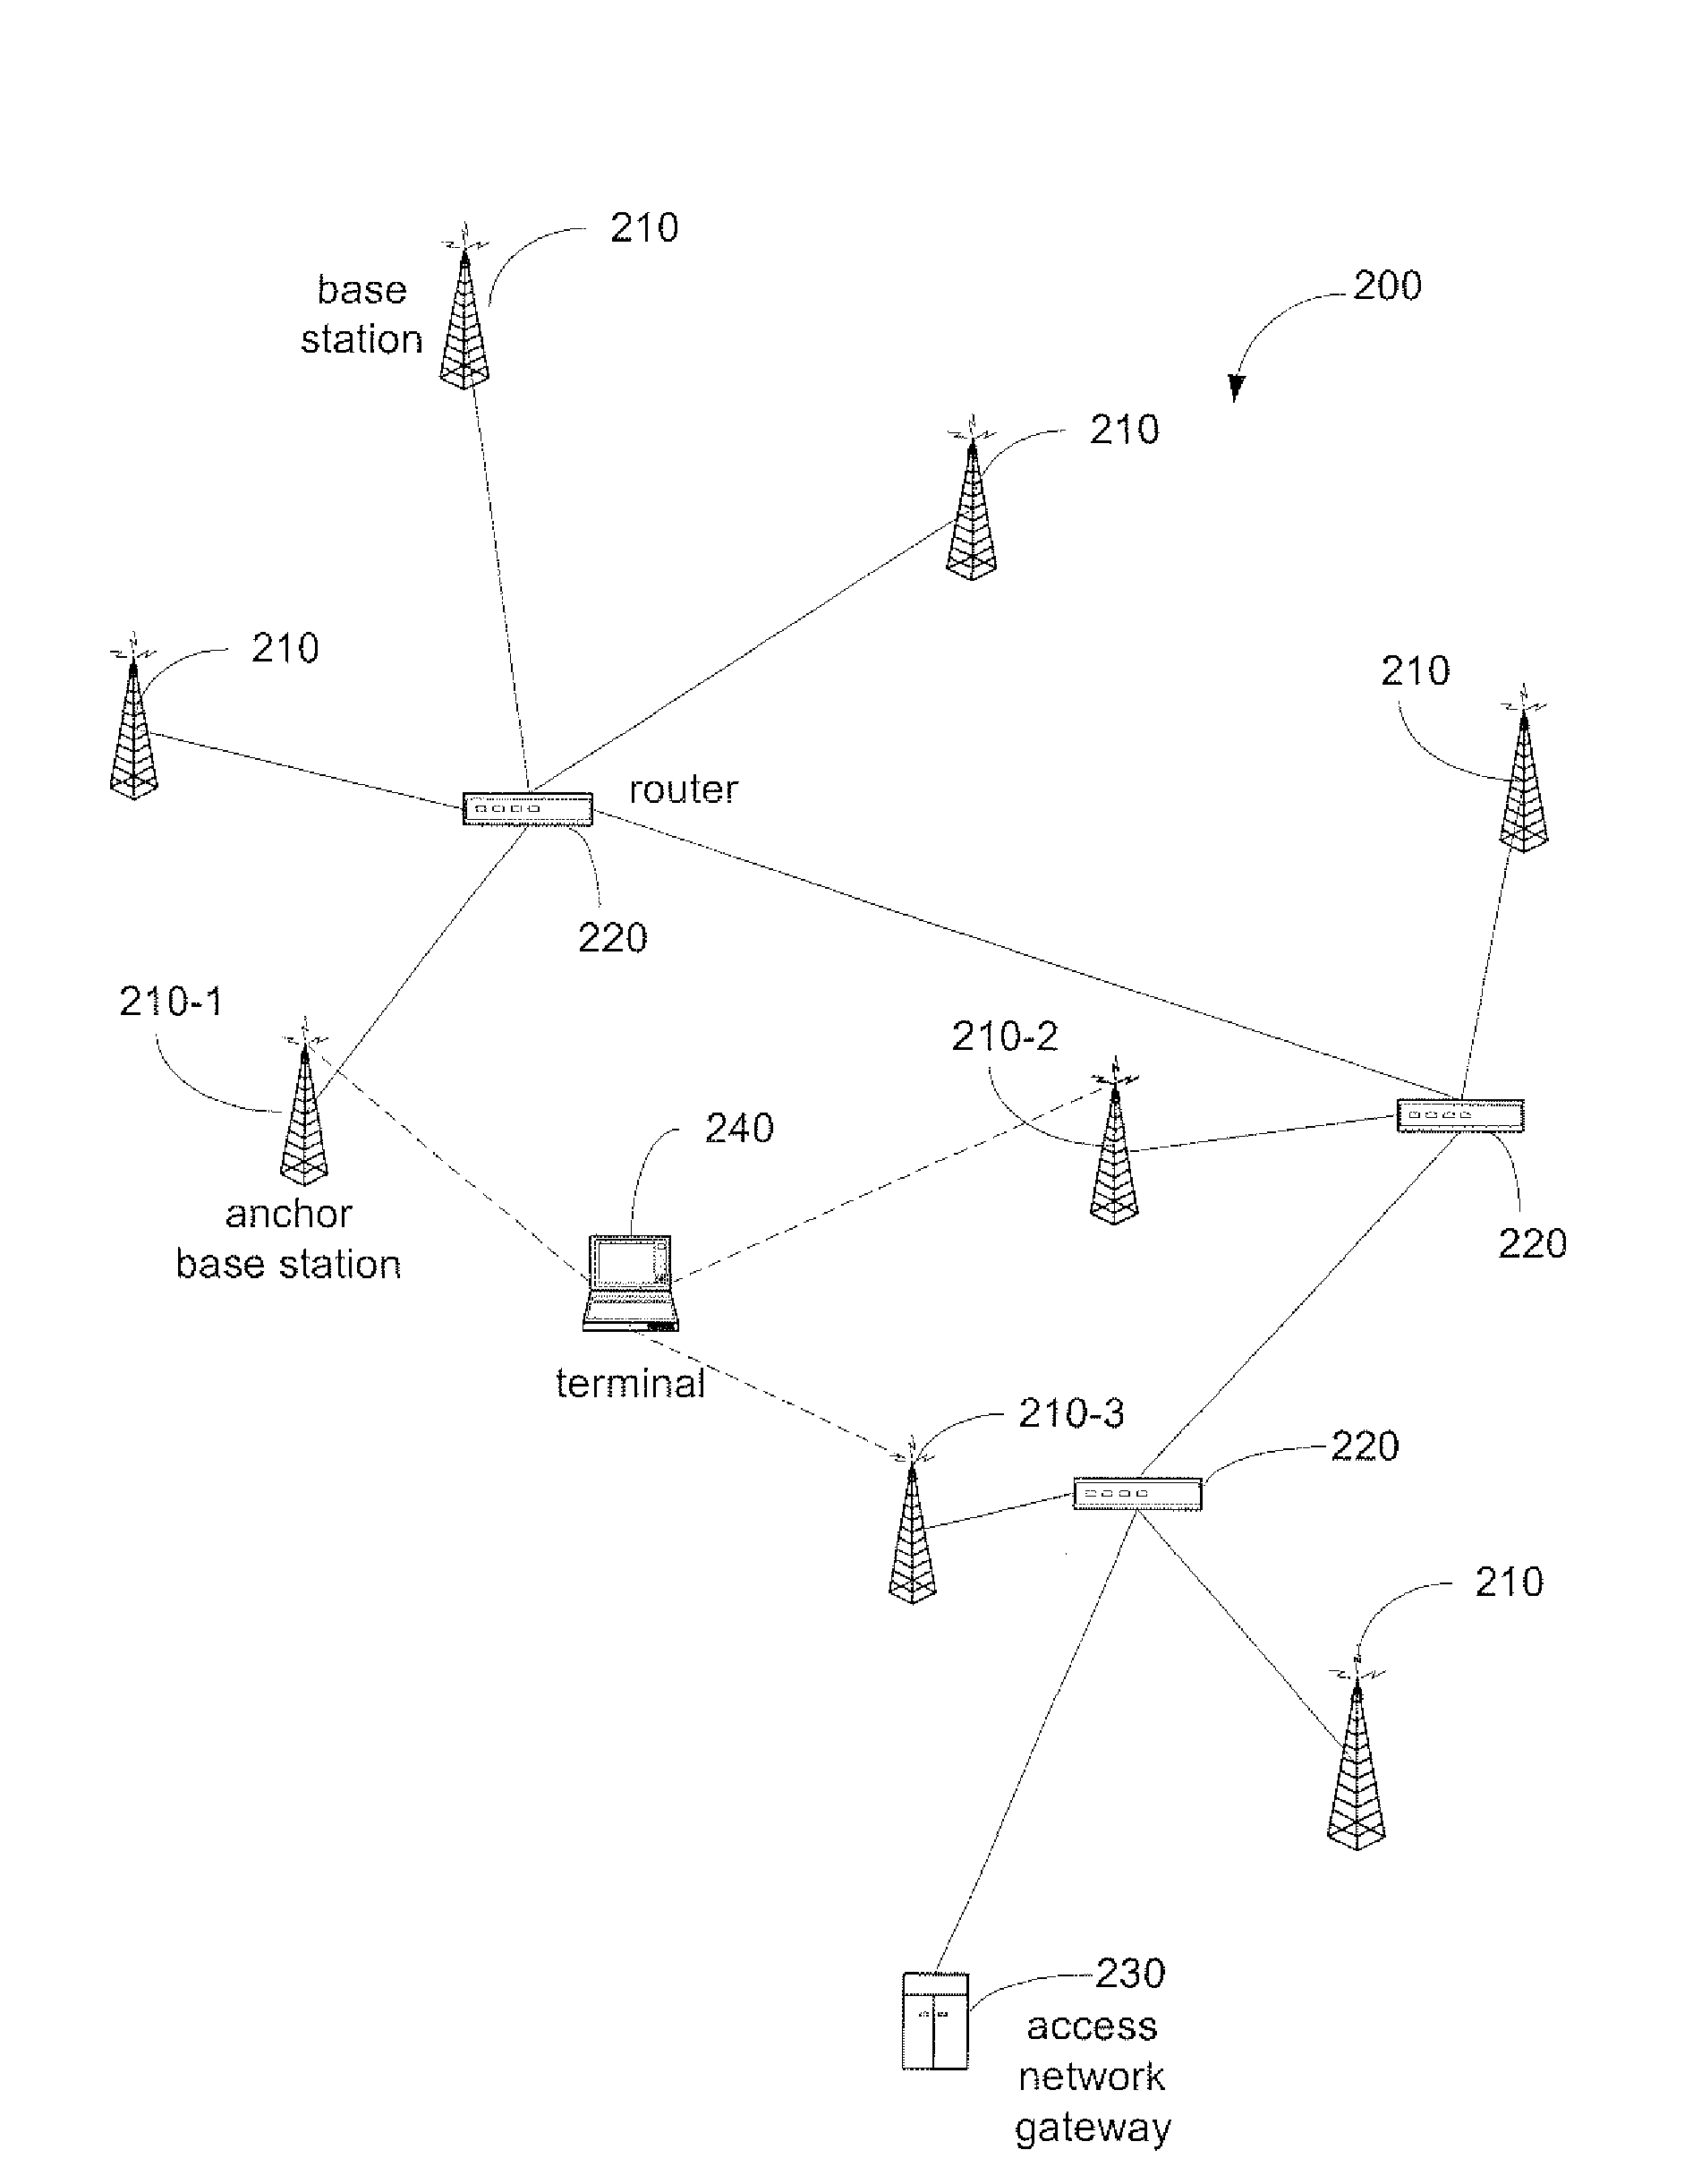 System and apparatus for interference suppression using macrodiversity in mobile wireless networks